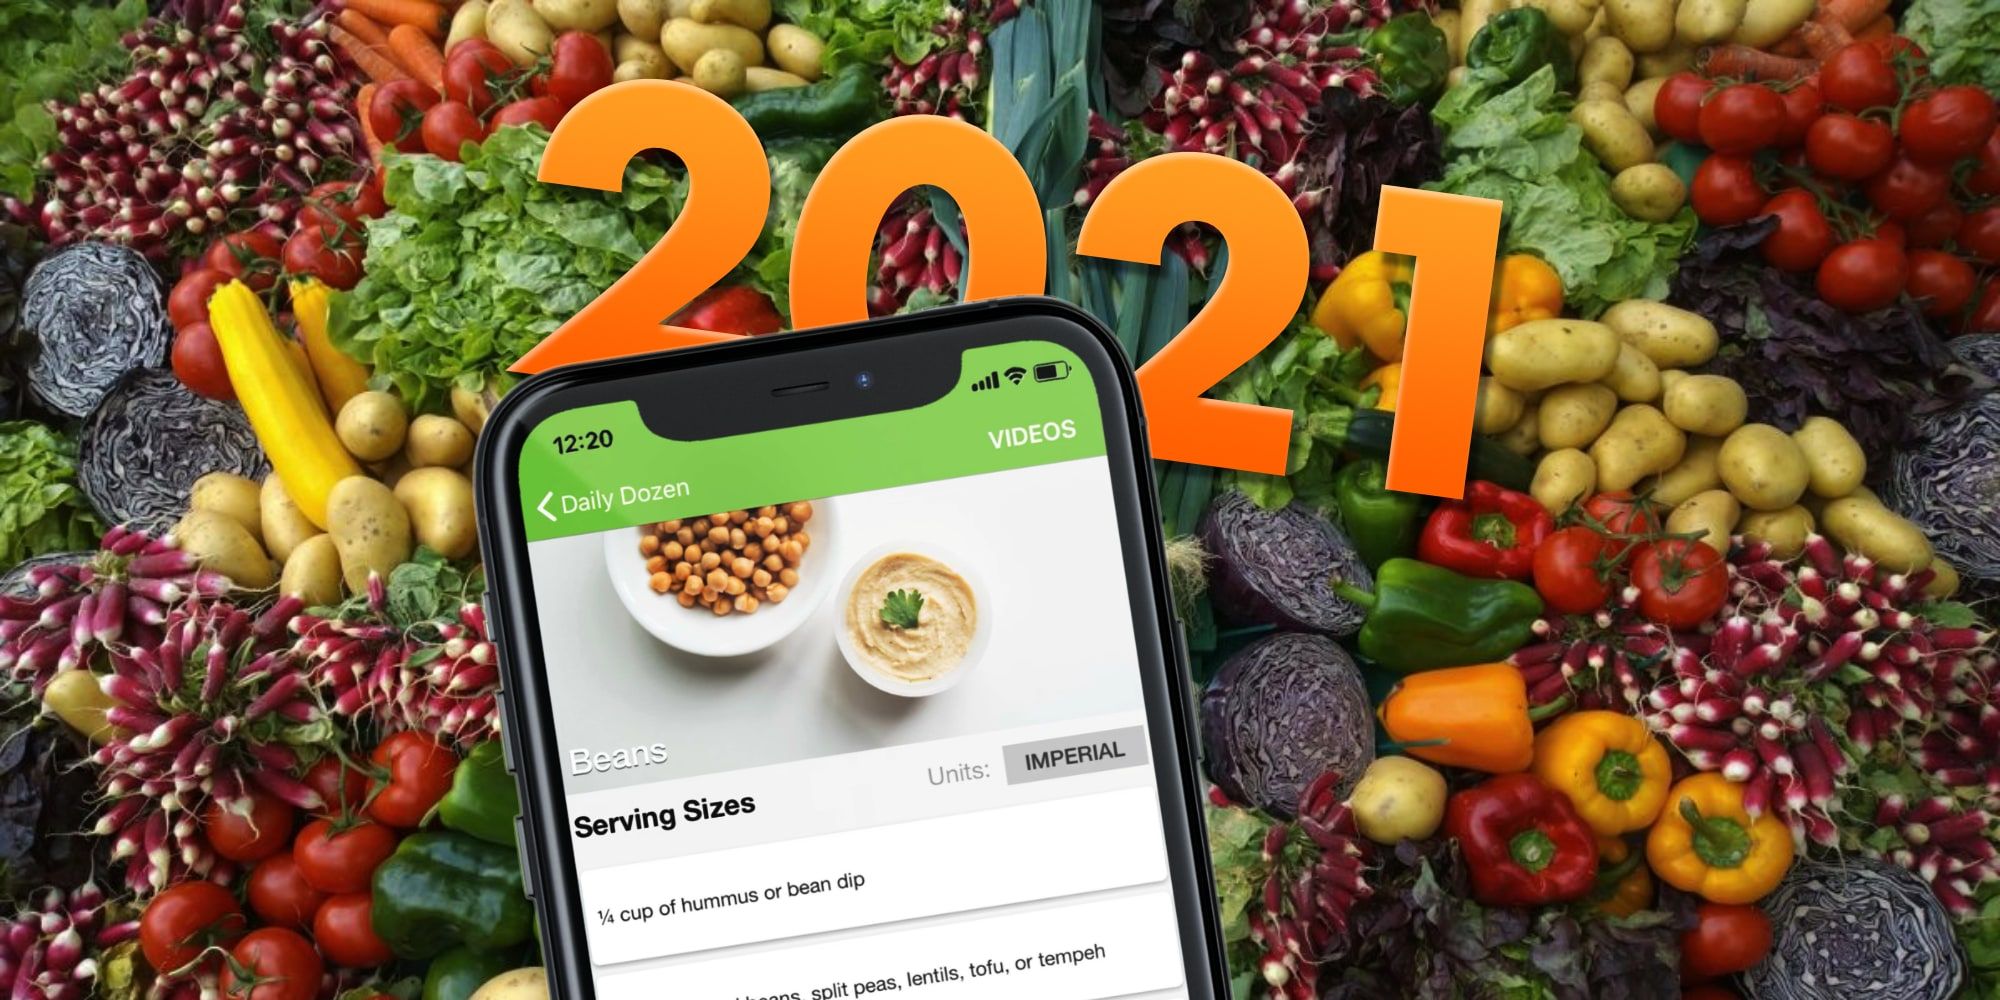 Best iOS Apps To Get 2021 Off To A Great Start